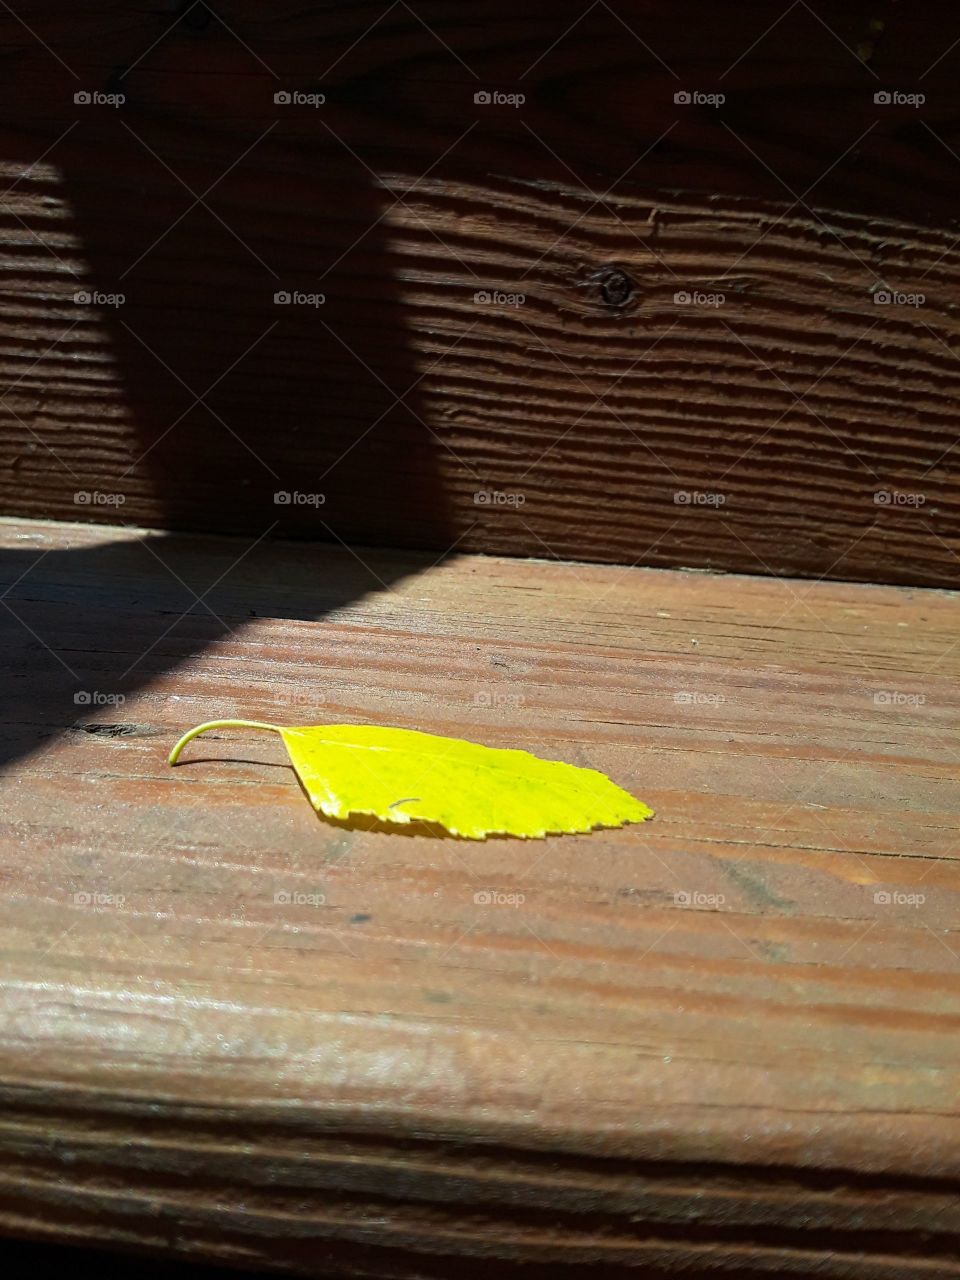 Beautiful contrast between the brown wood steps and the bright yellow leaf.